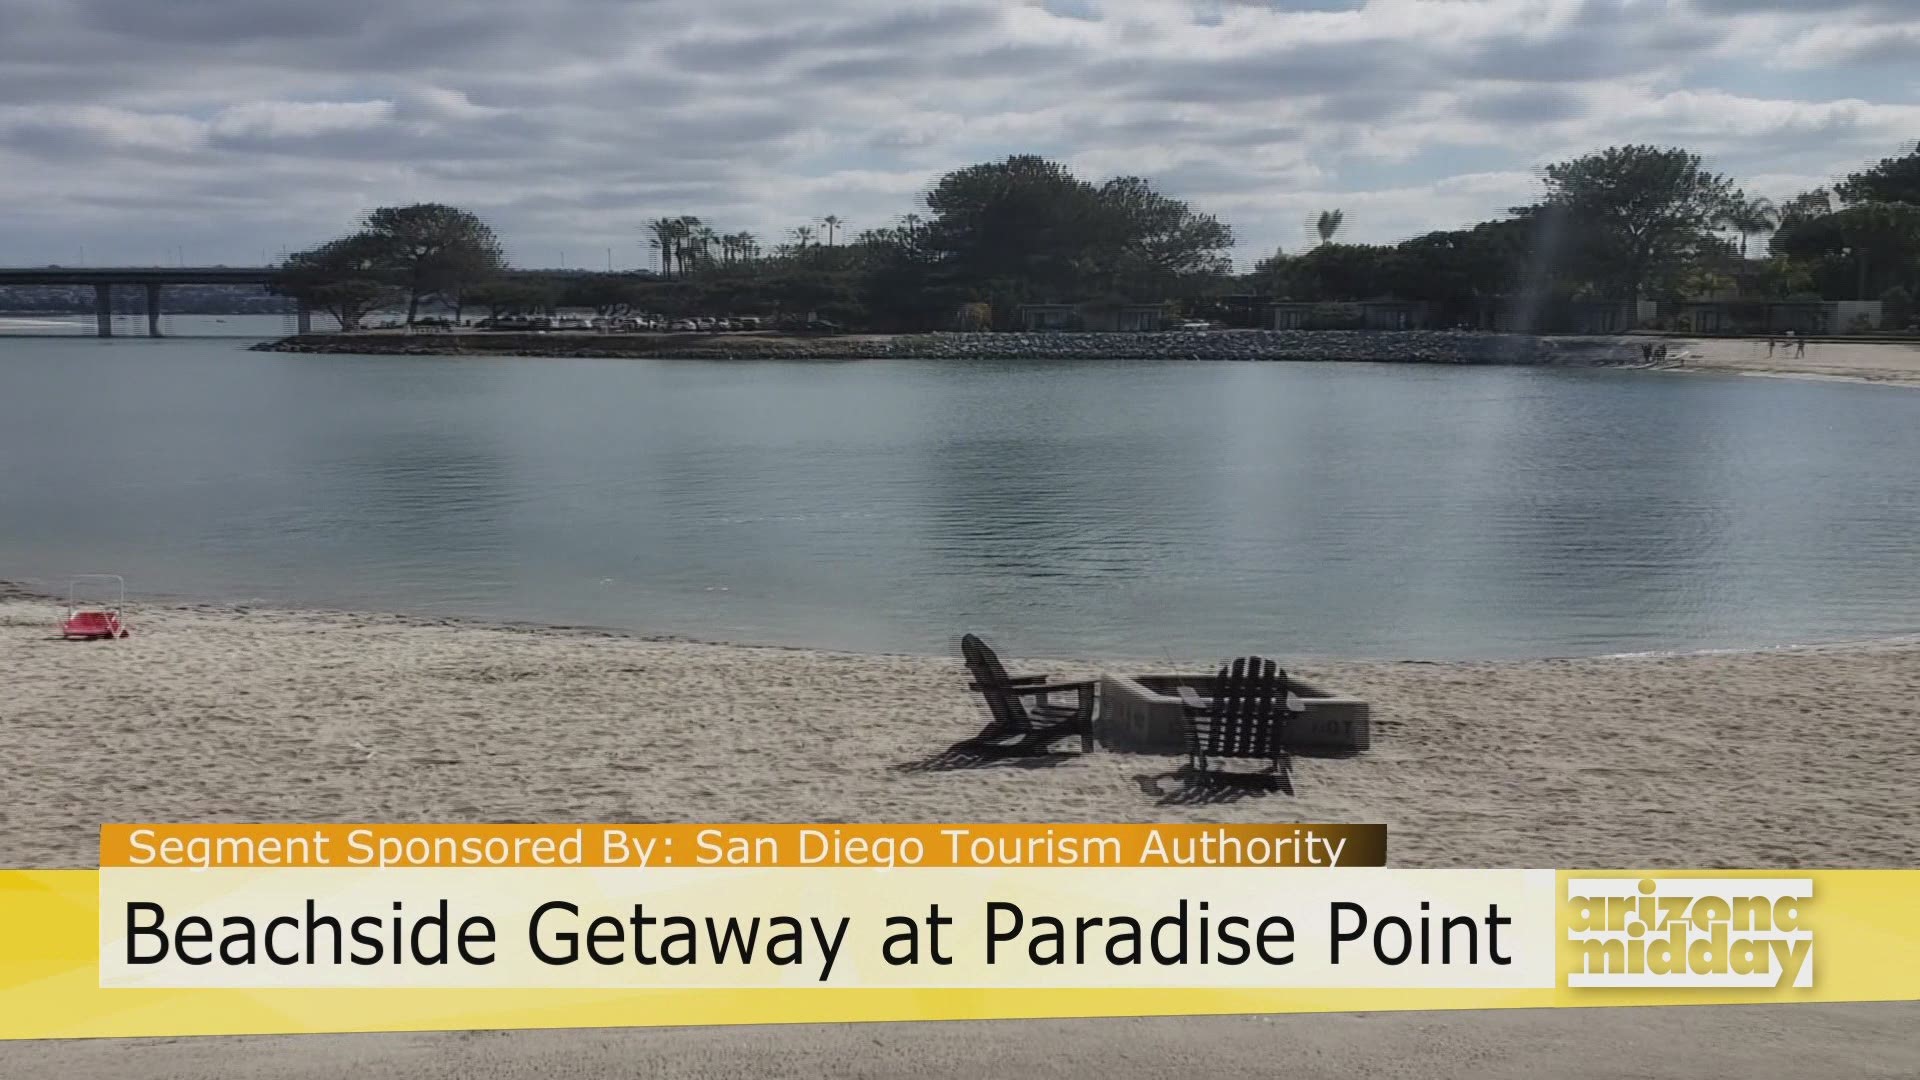 From bonfires on the beach to swimming, this private beach resort is the perfect place to bring the family on vacation. We’ve got the scoop on Paradise Point Resort and Spa